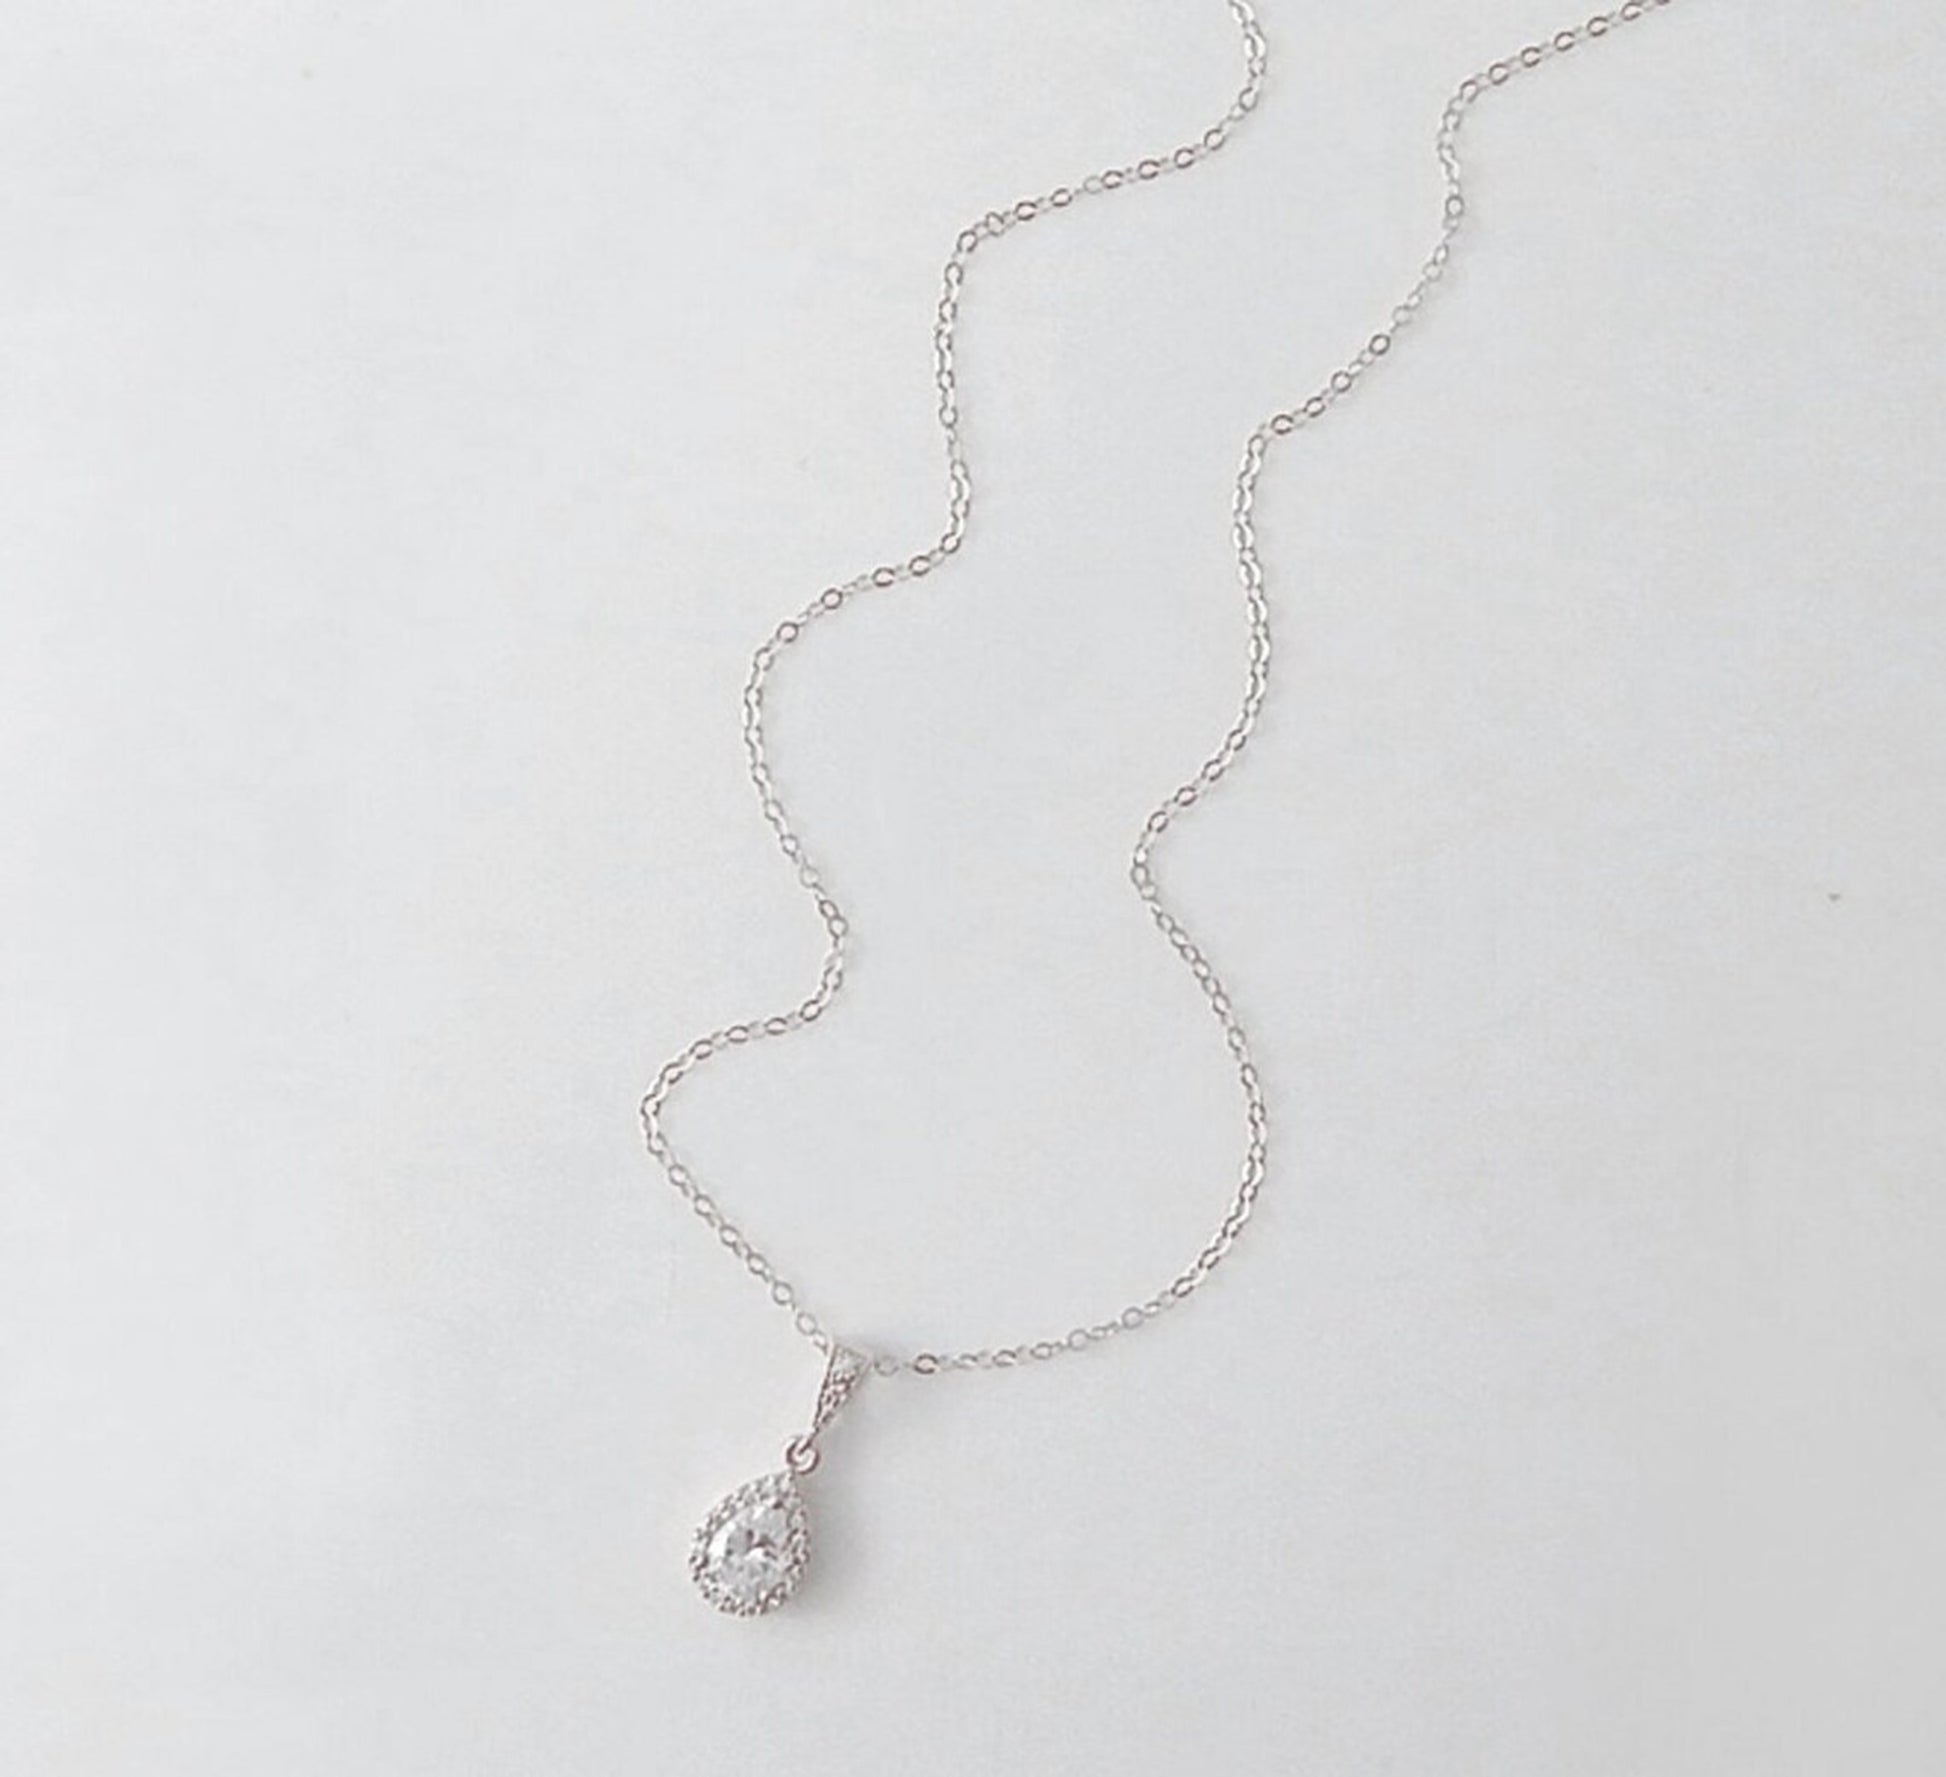 Silver necklace with a large teardrop cubic zirconia pendant on white background.